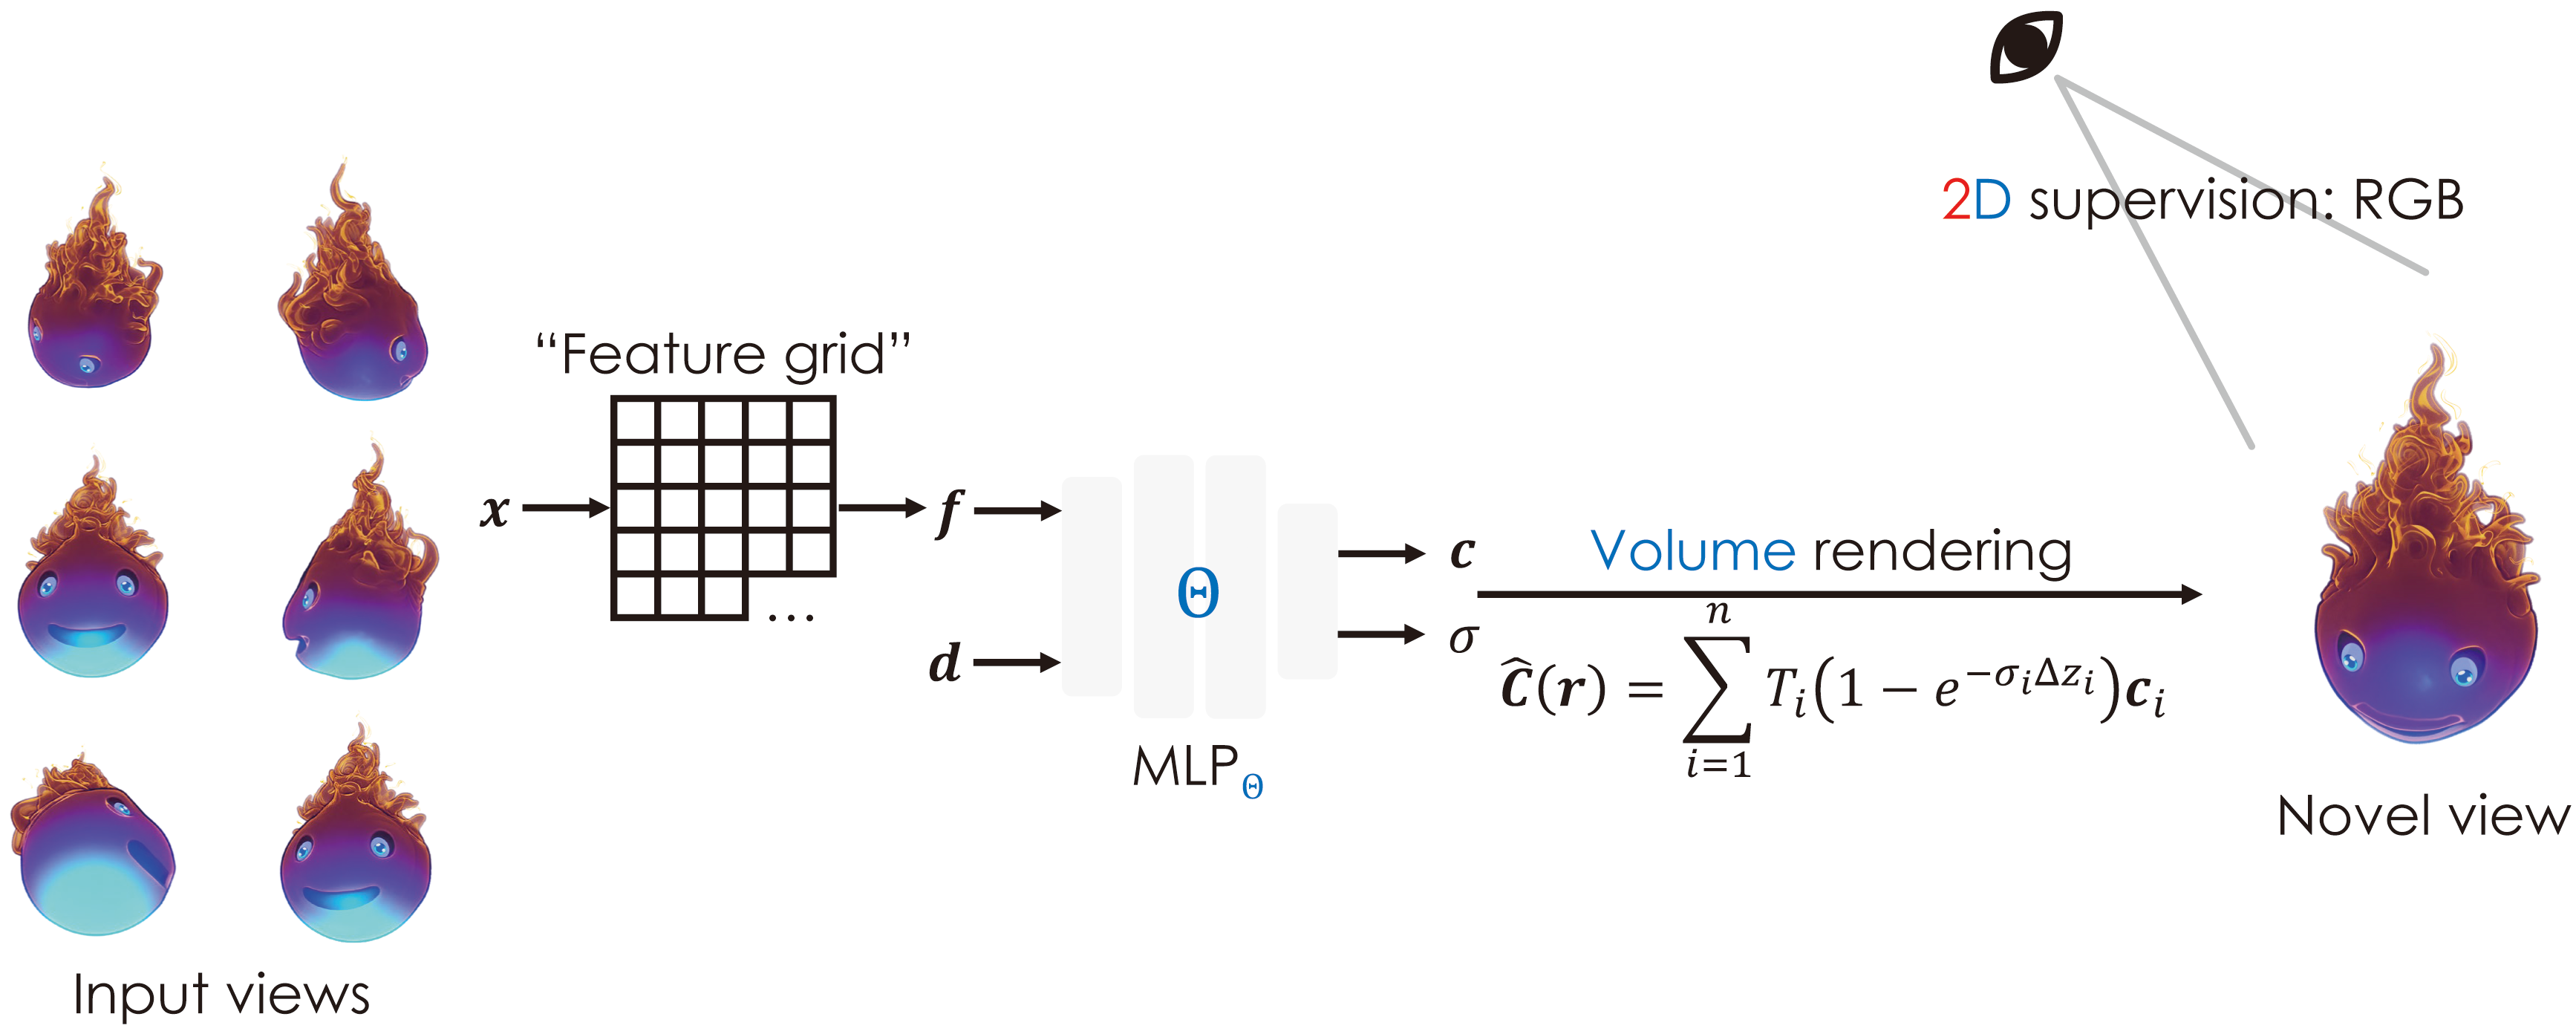 Introduction of feature grid for rapid convergence